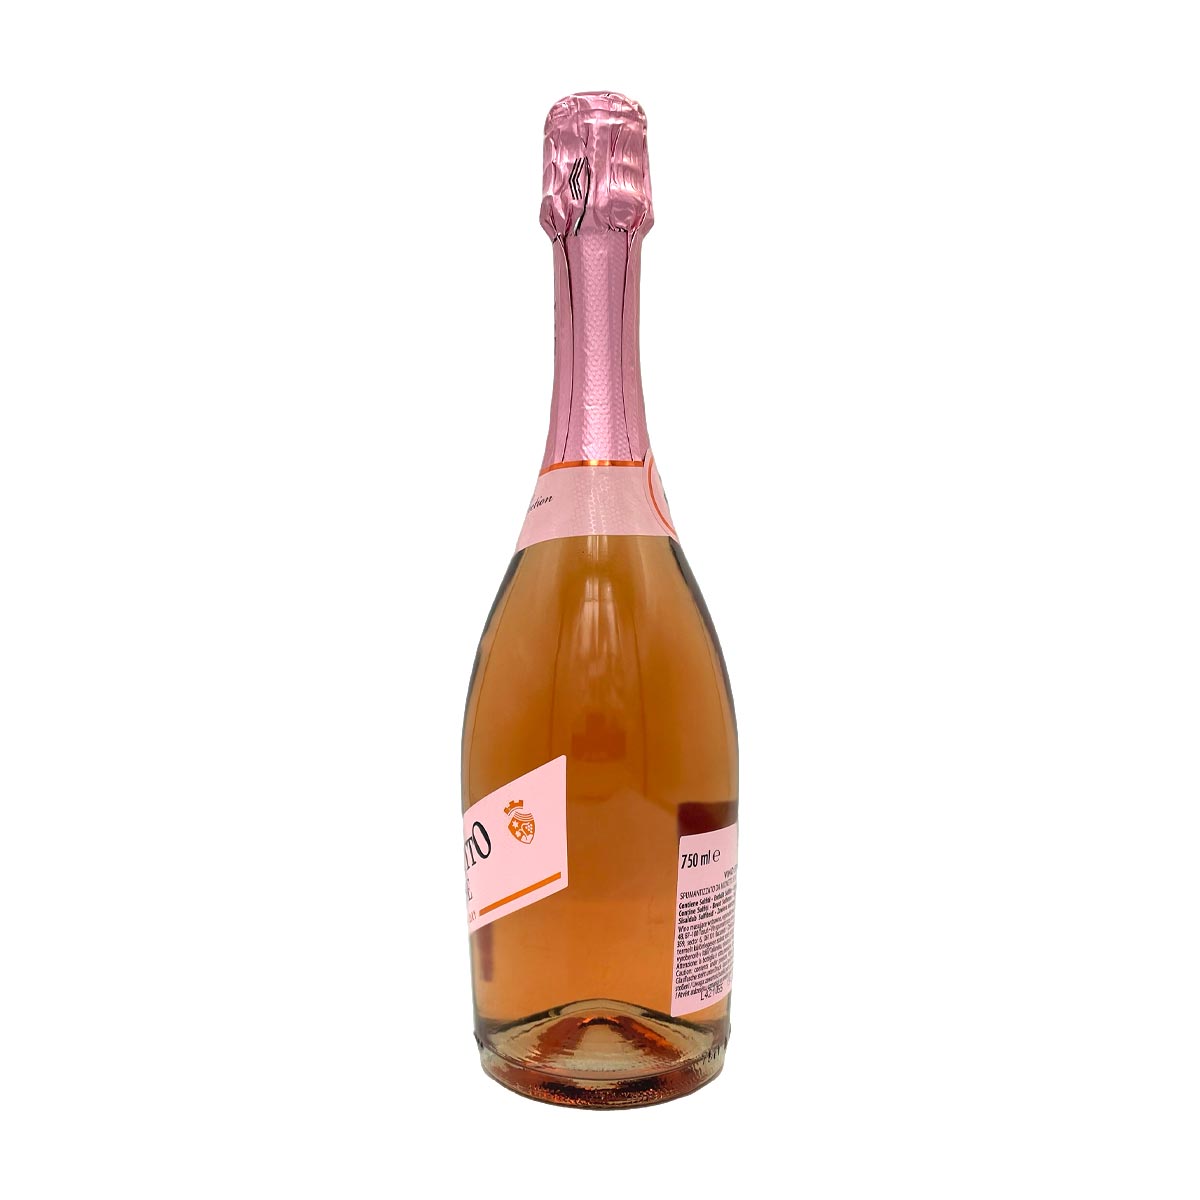 Mionetto Prosecco Rosé DOC Extra Dry jetzt kaufen bei